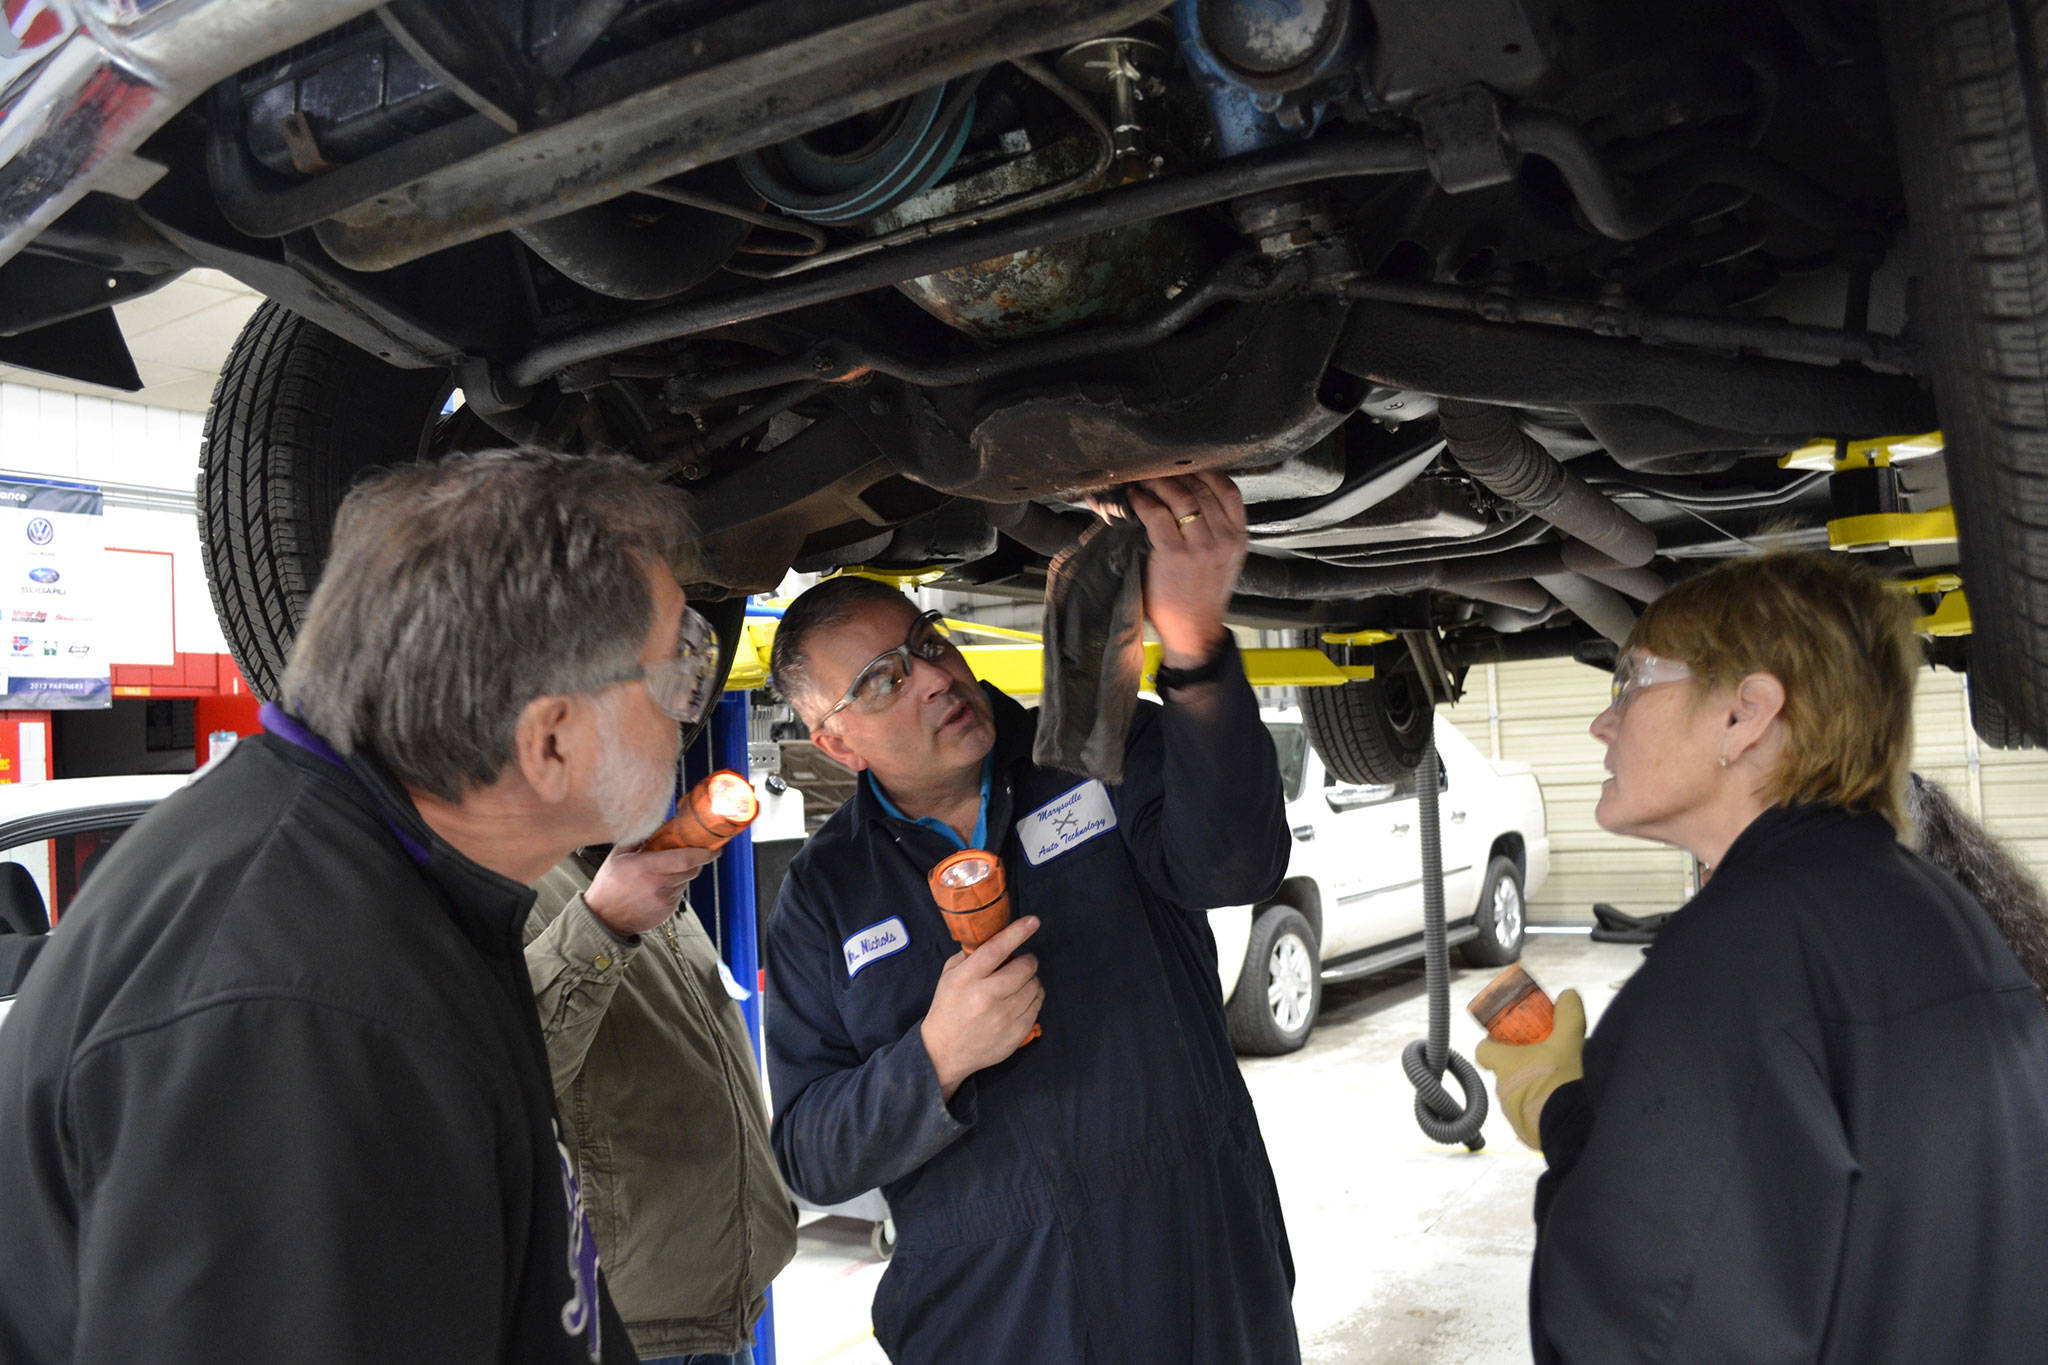 You can trust this free advice on your car at M-P seminars